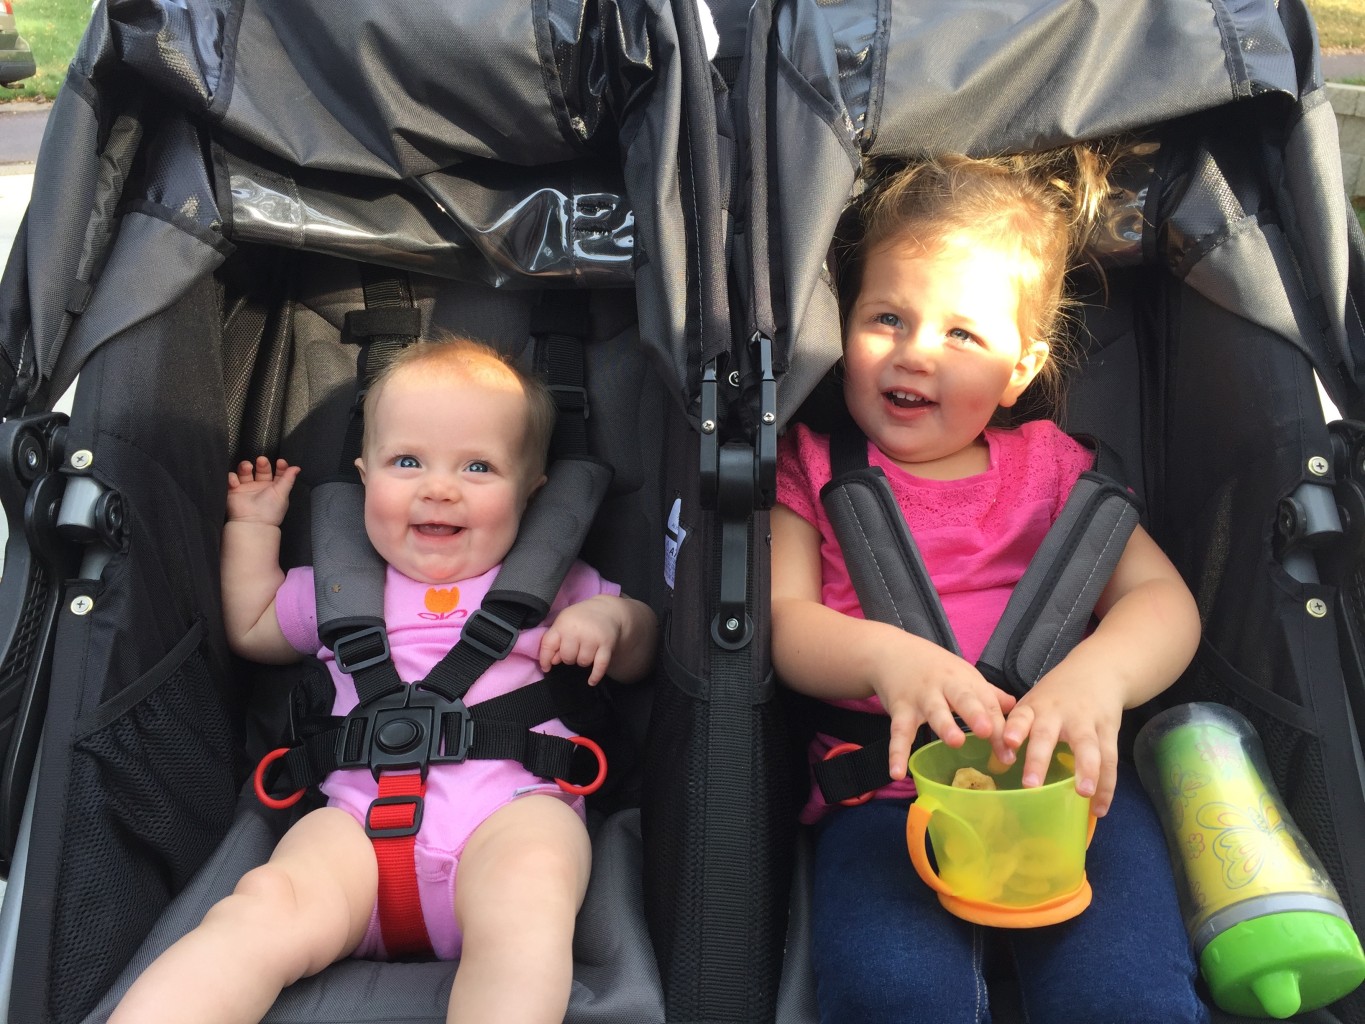 Campbell's now old enough to sit in the stroller with her big sister!